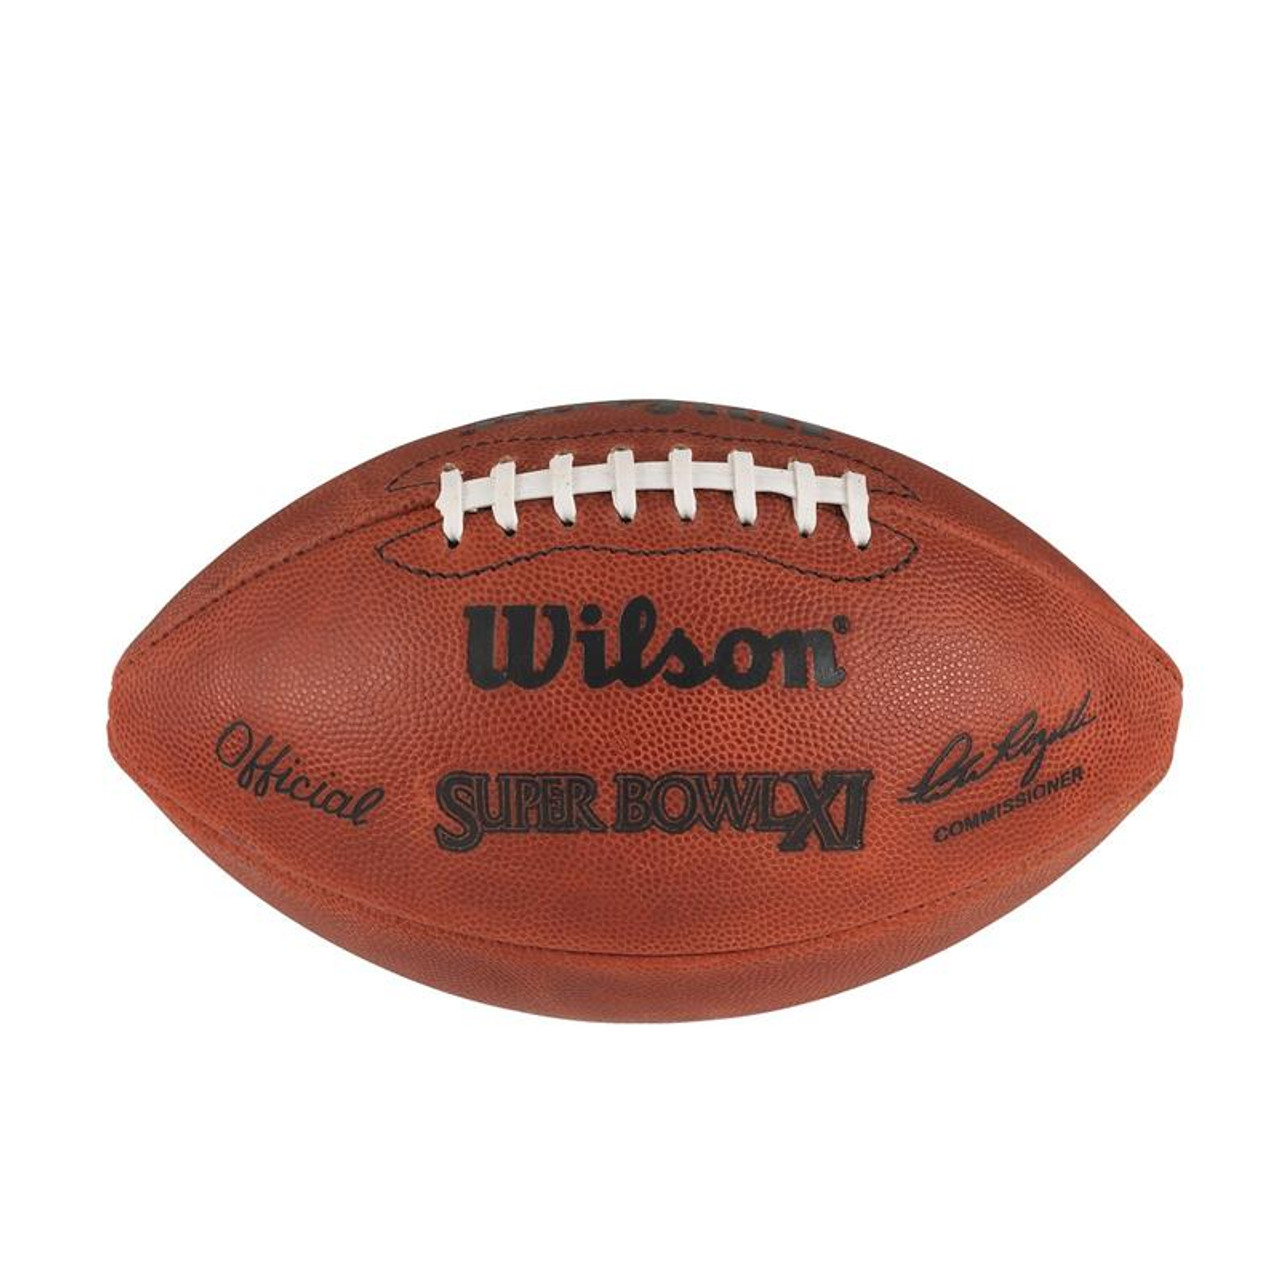 Super Bowl XI (Eleven 11) Minnesota Vikings vs. Oakland Raiders Official  Leather Authentic Game Football by Wilson